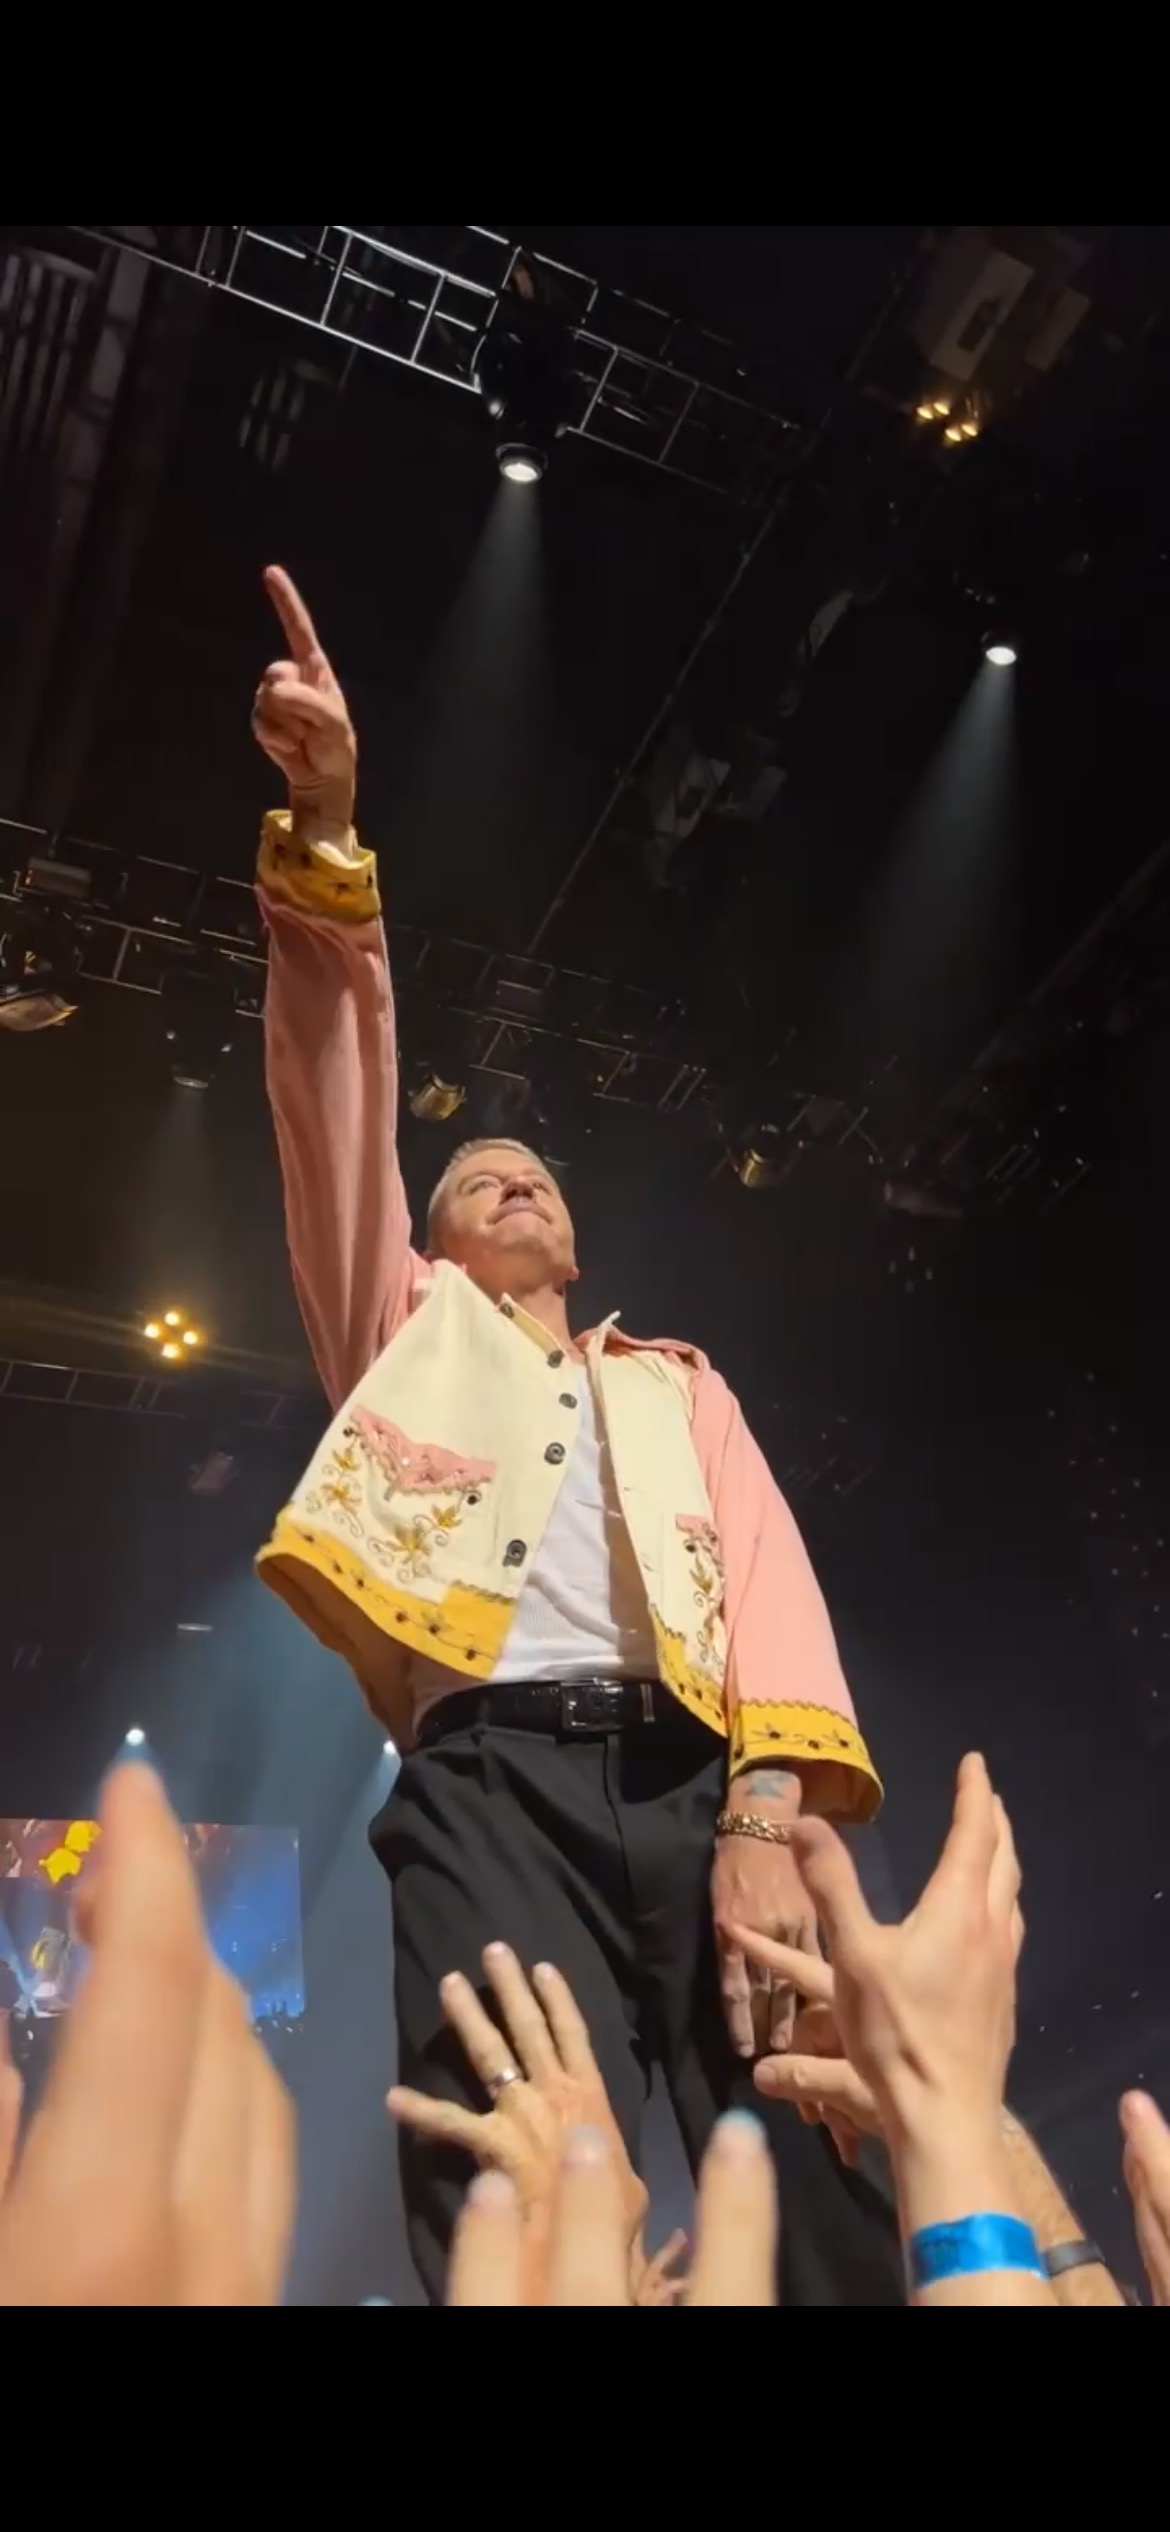 Macklemore Brings Electric BEN Tour to the Nation’s Capital